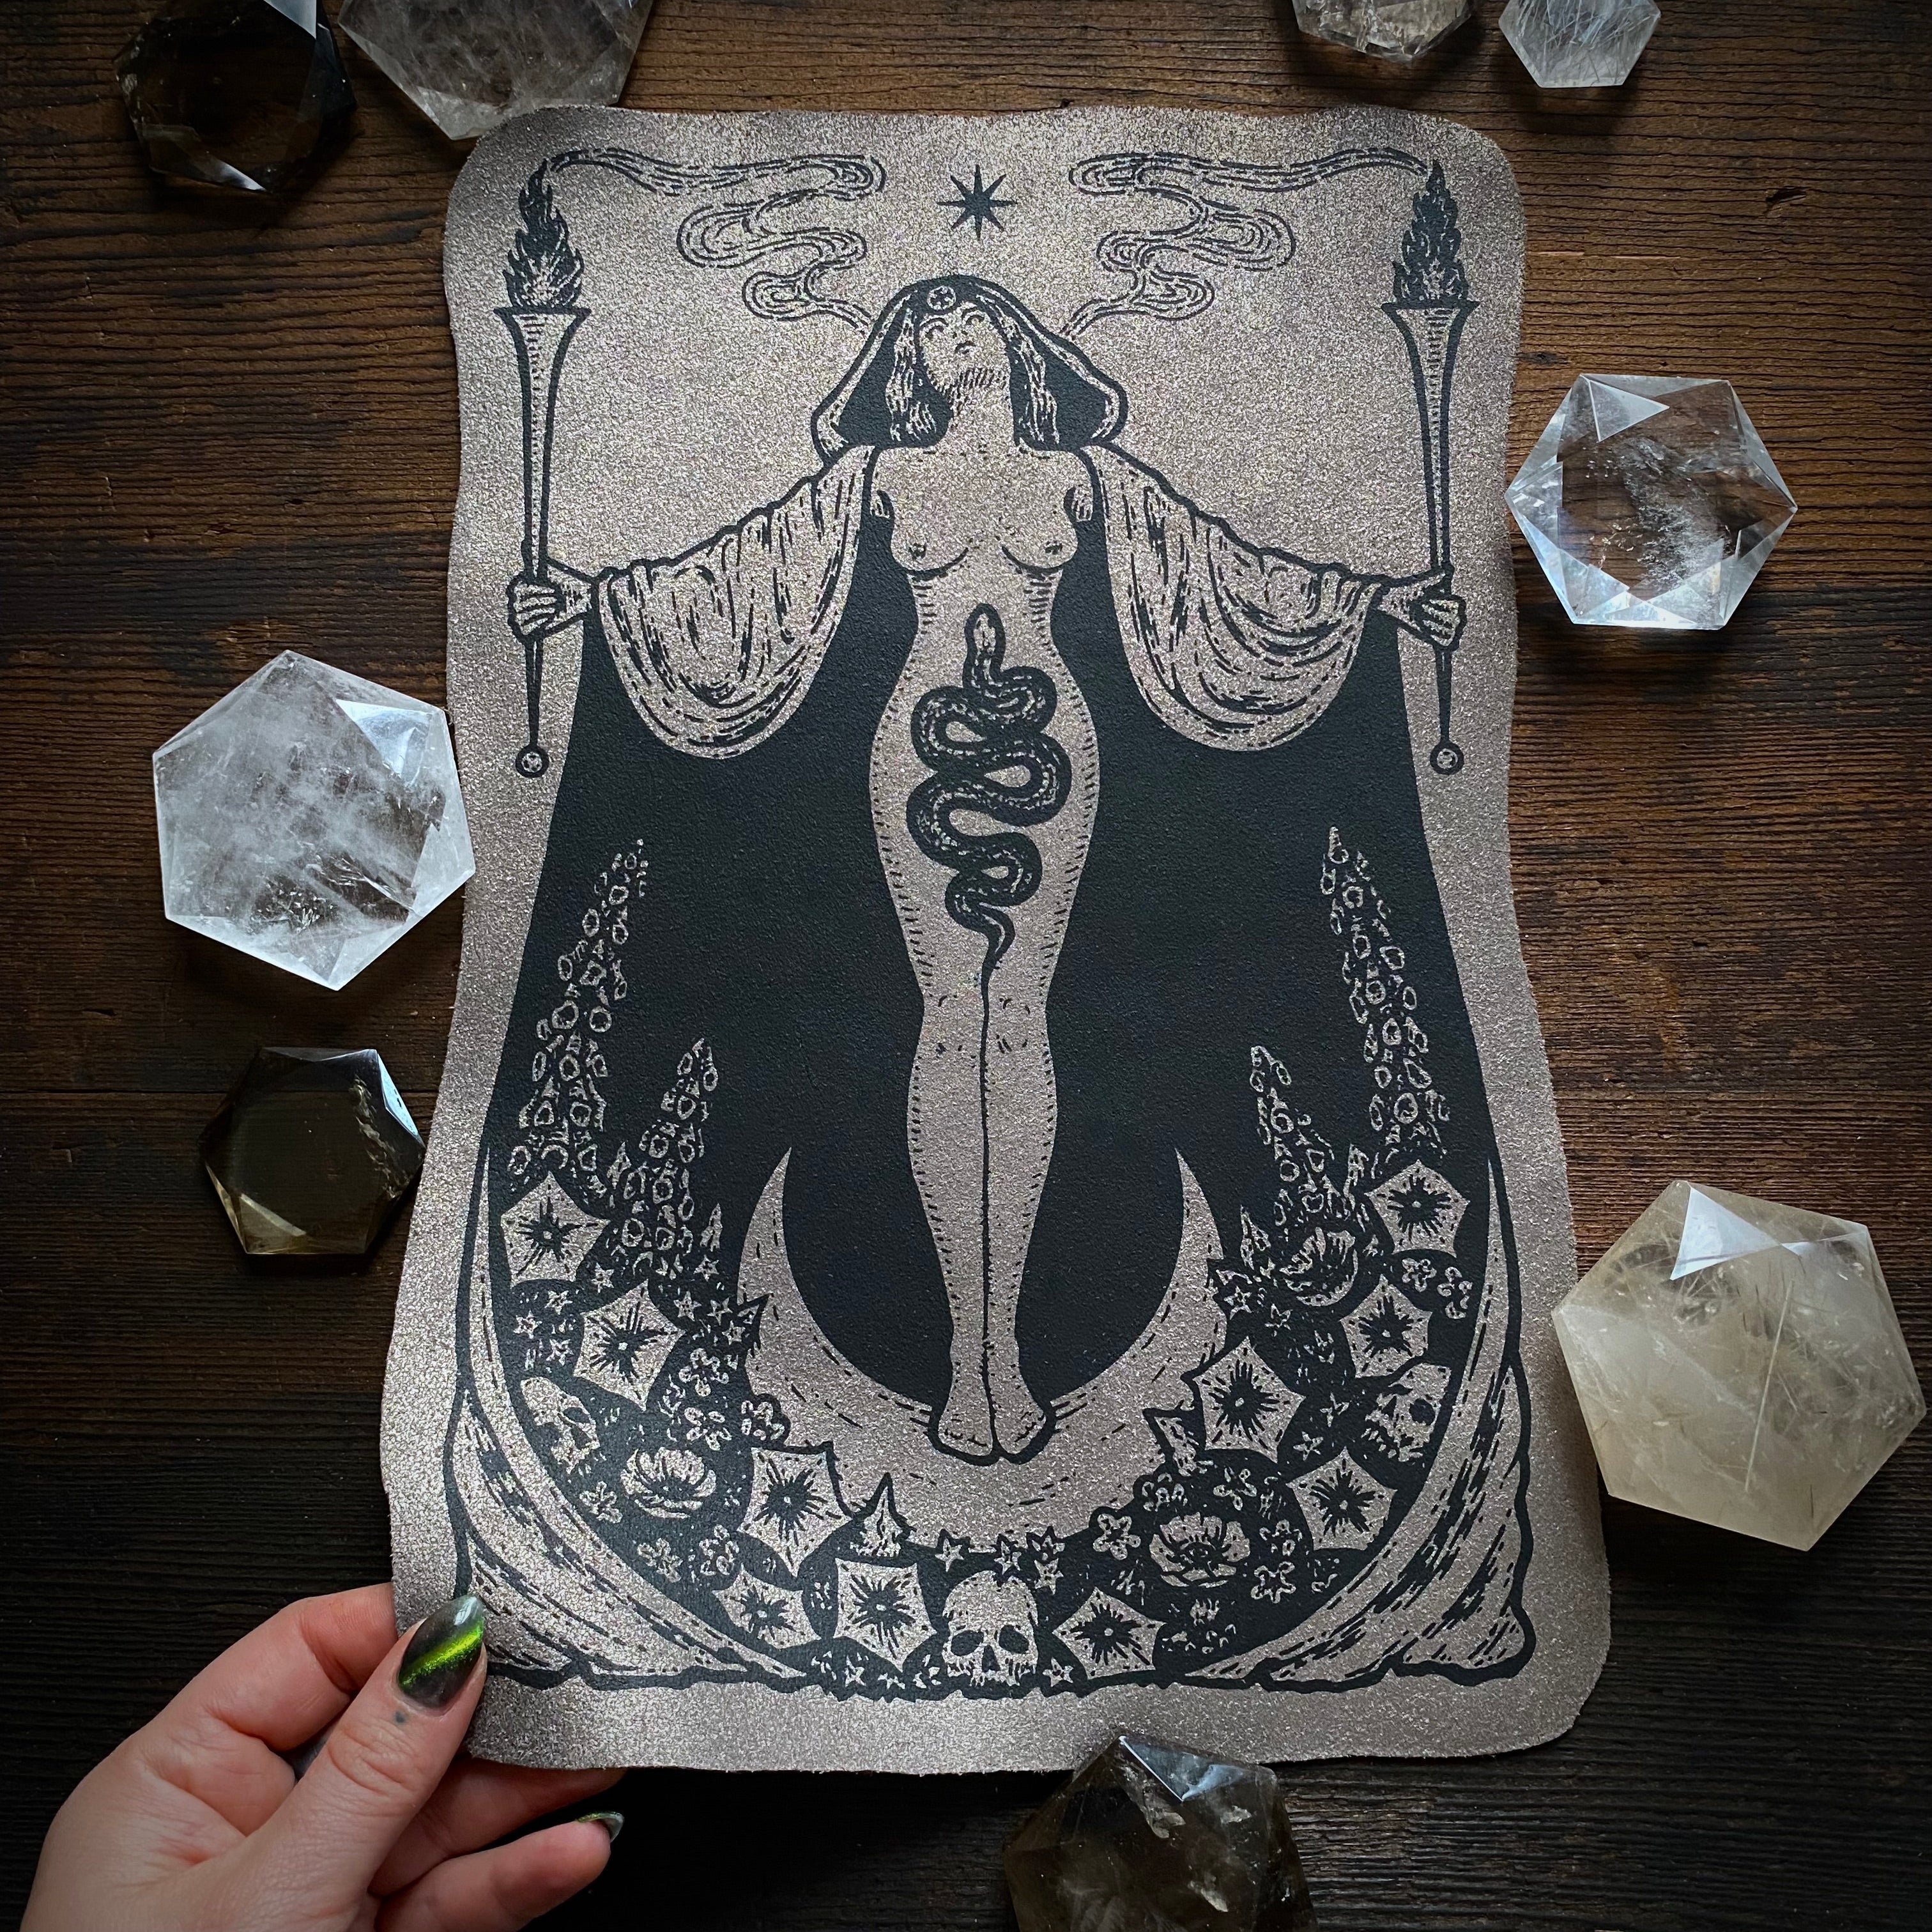 Hecate's Garden leather patch and altar cloth